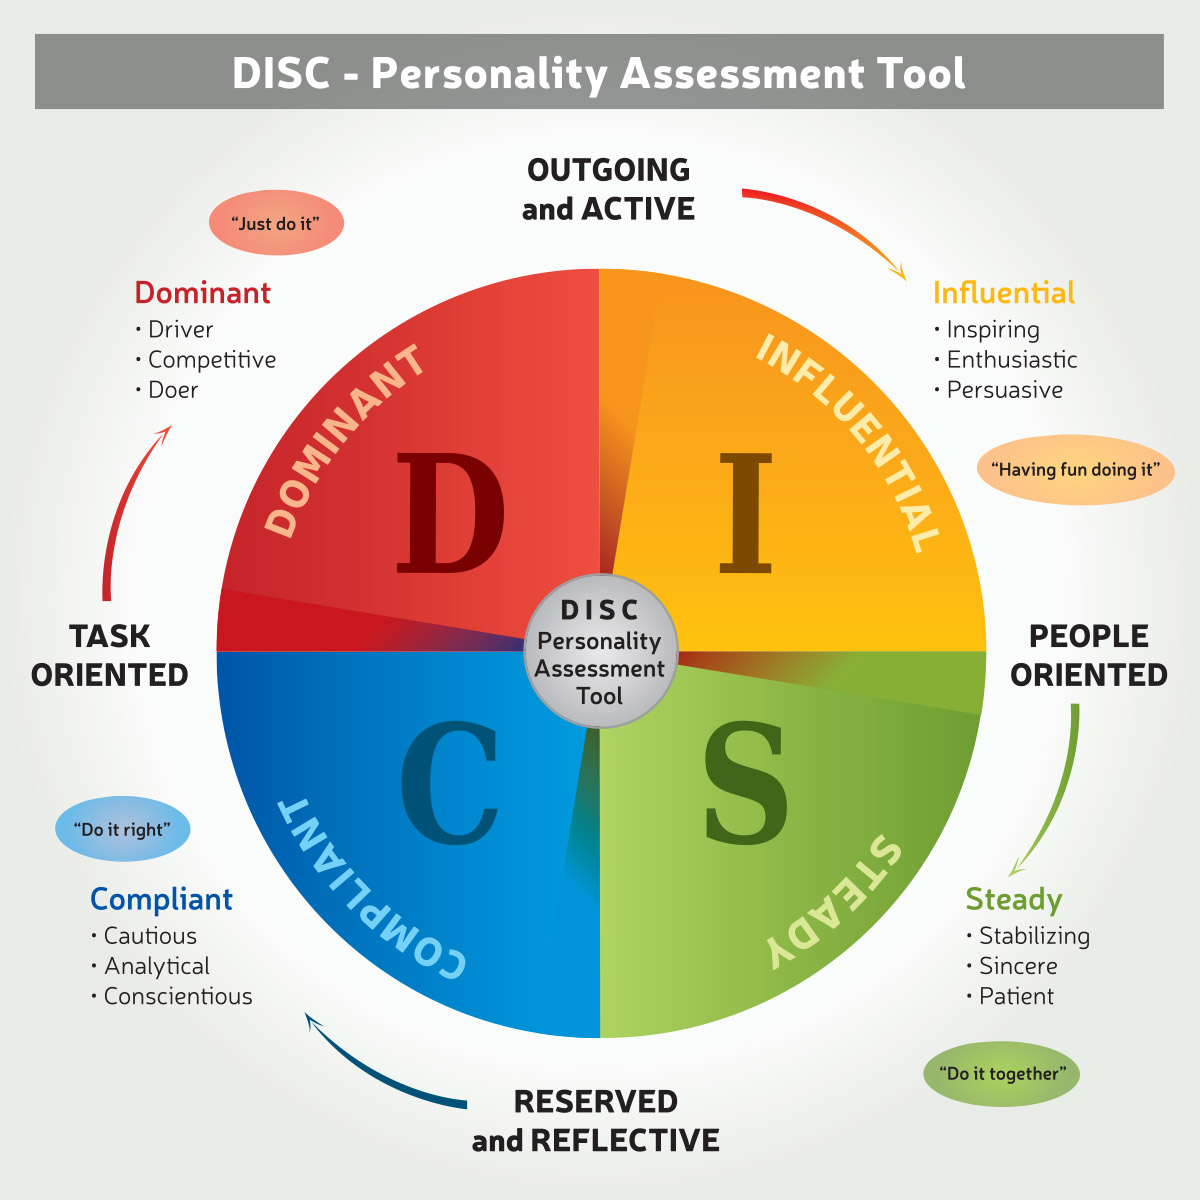 DISC Personality Assessment Tool